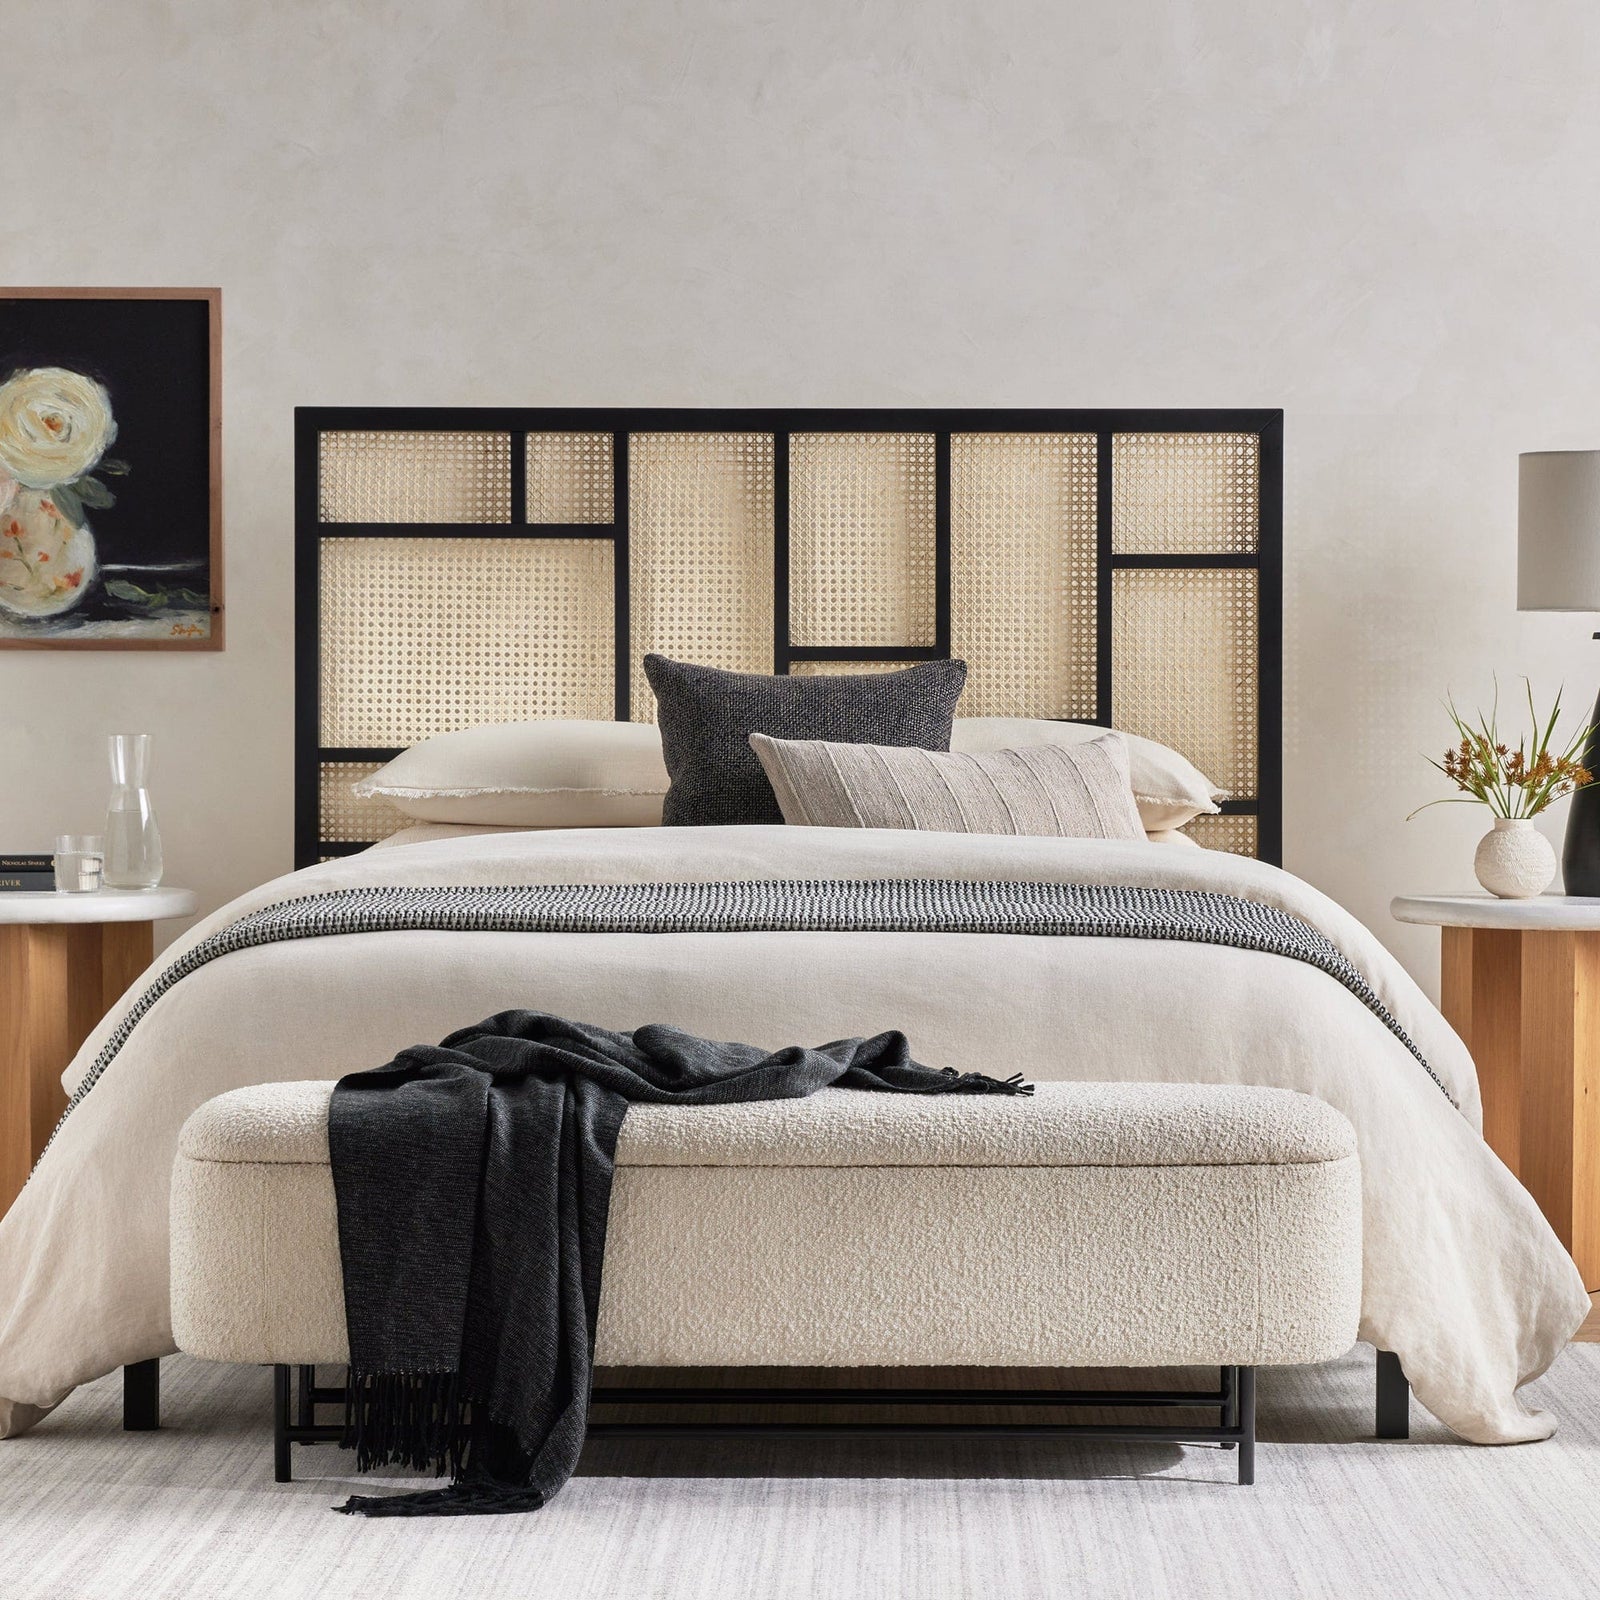 Four Hands Bed and Headboards: Create a Sensual Bedroom Look